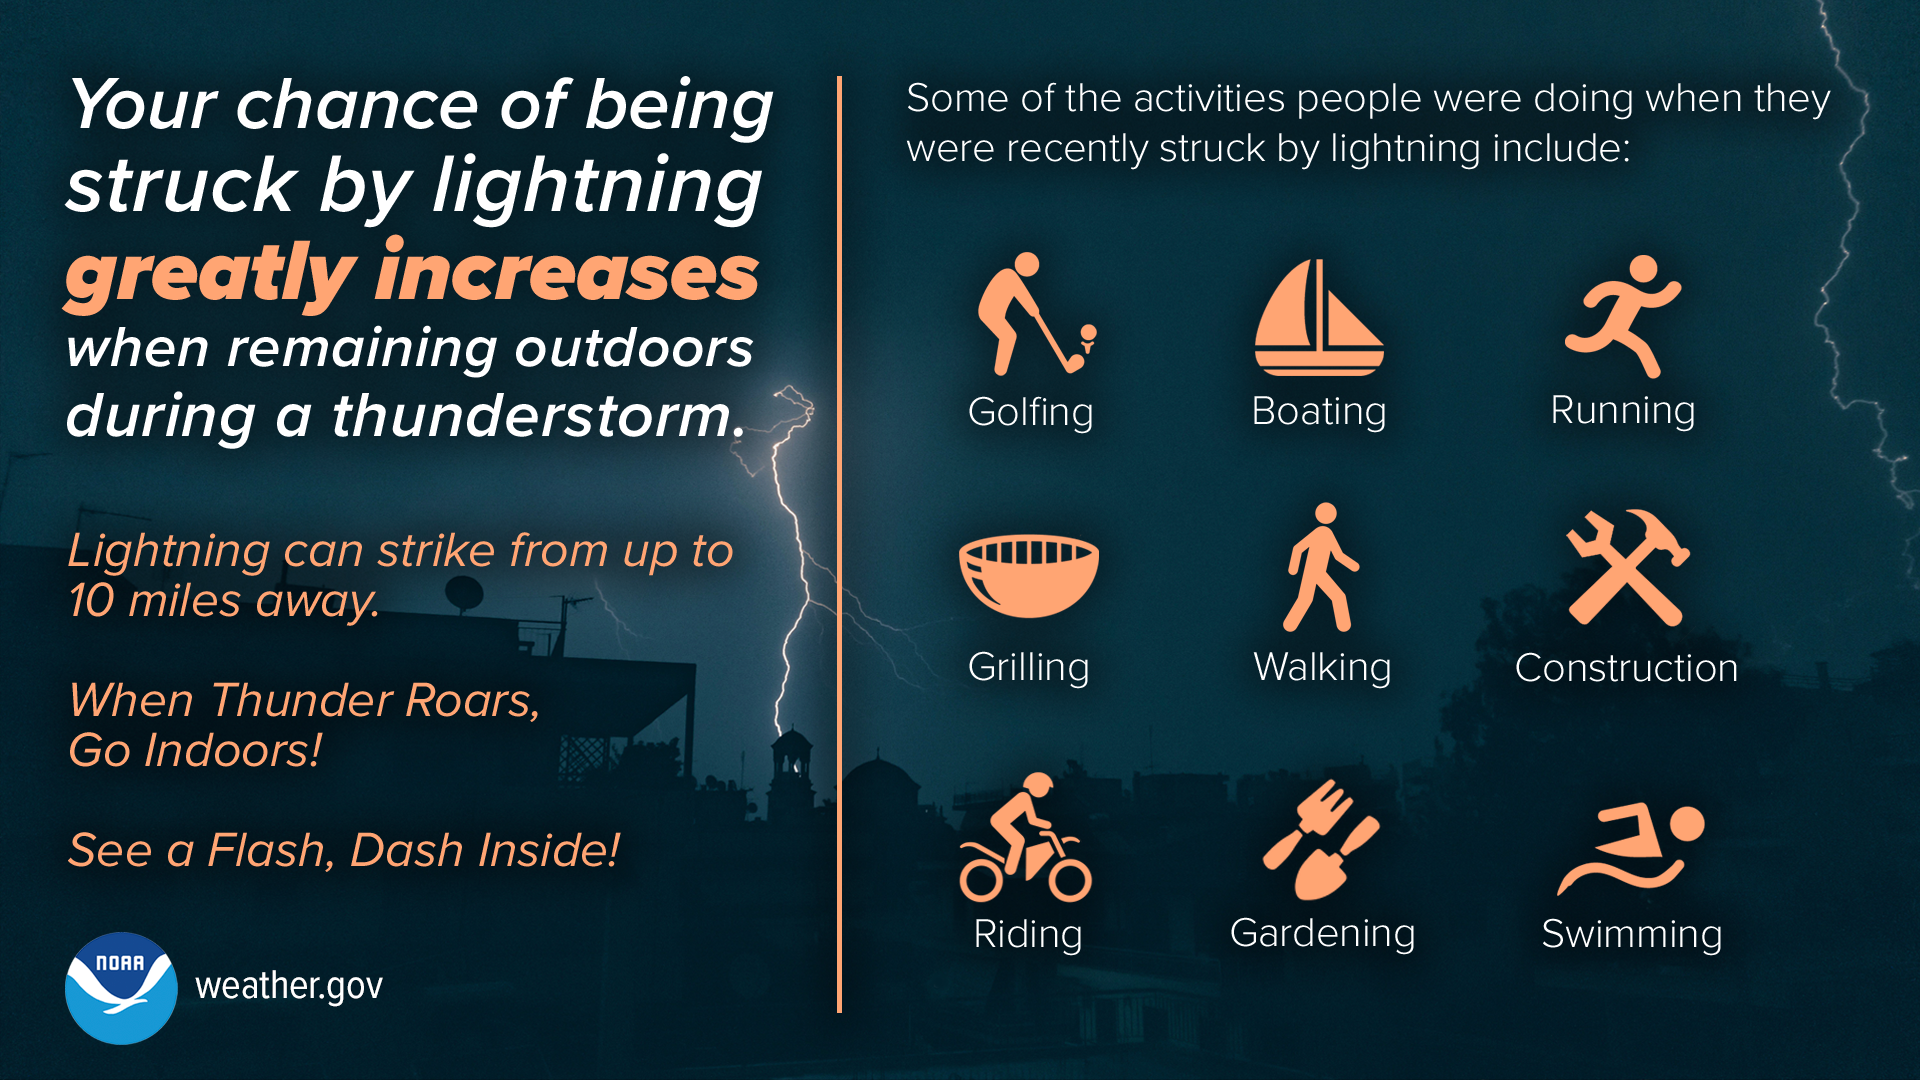 Your chance of being struck by lightning greatly increases when remaining outdoors during a thunderstorm. Lightning can strike from up to 10 miles away. Some of the activities people were doing when they were recently struck by lightning include golfing, boating, running, grilling, walking, construction, riding, gardening, and swimming. When thunder roars, go indoors! See a flash, dash inside!